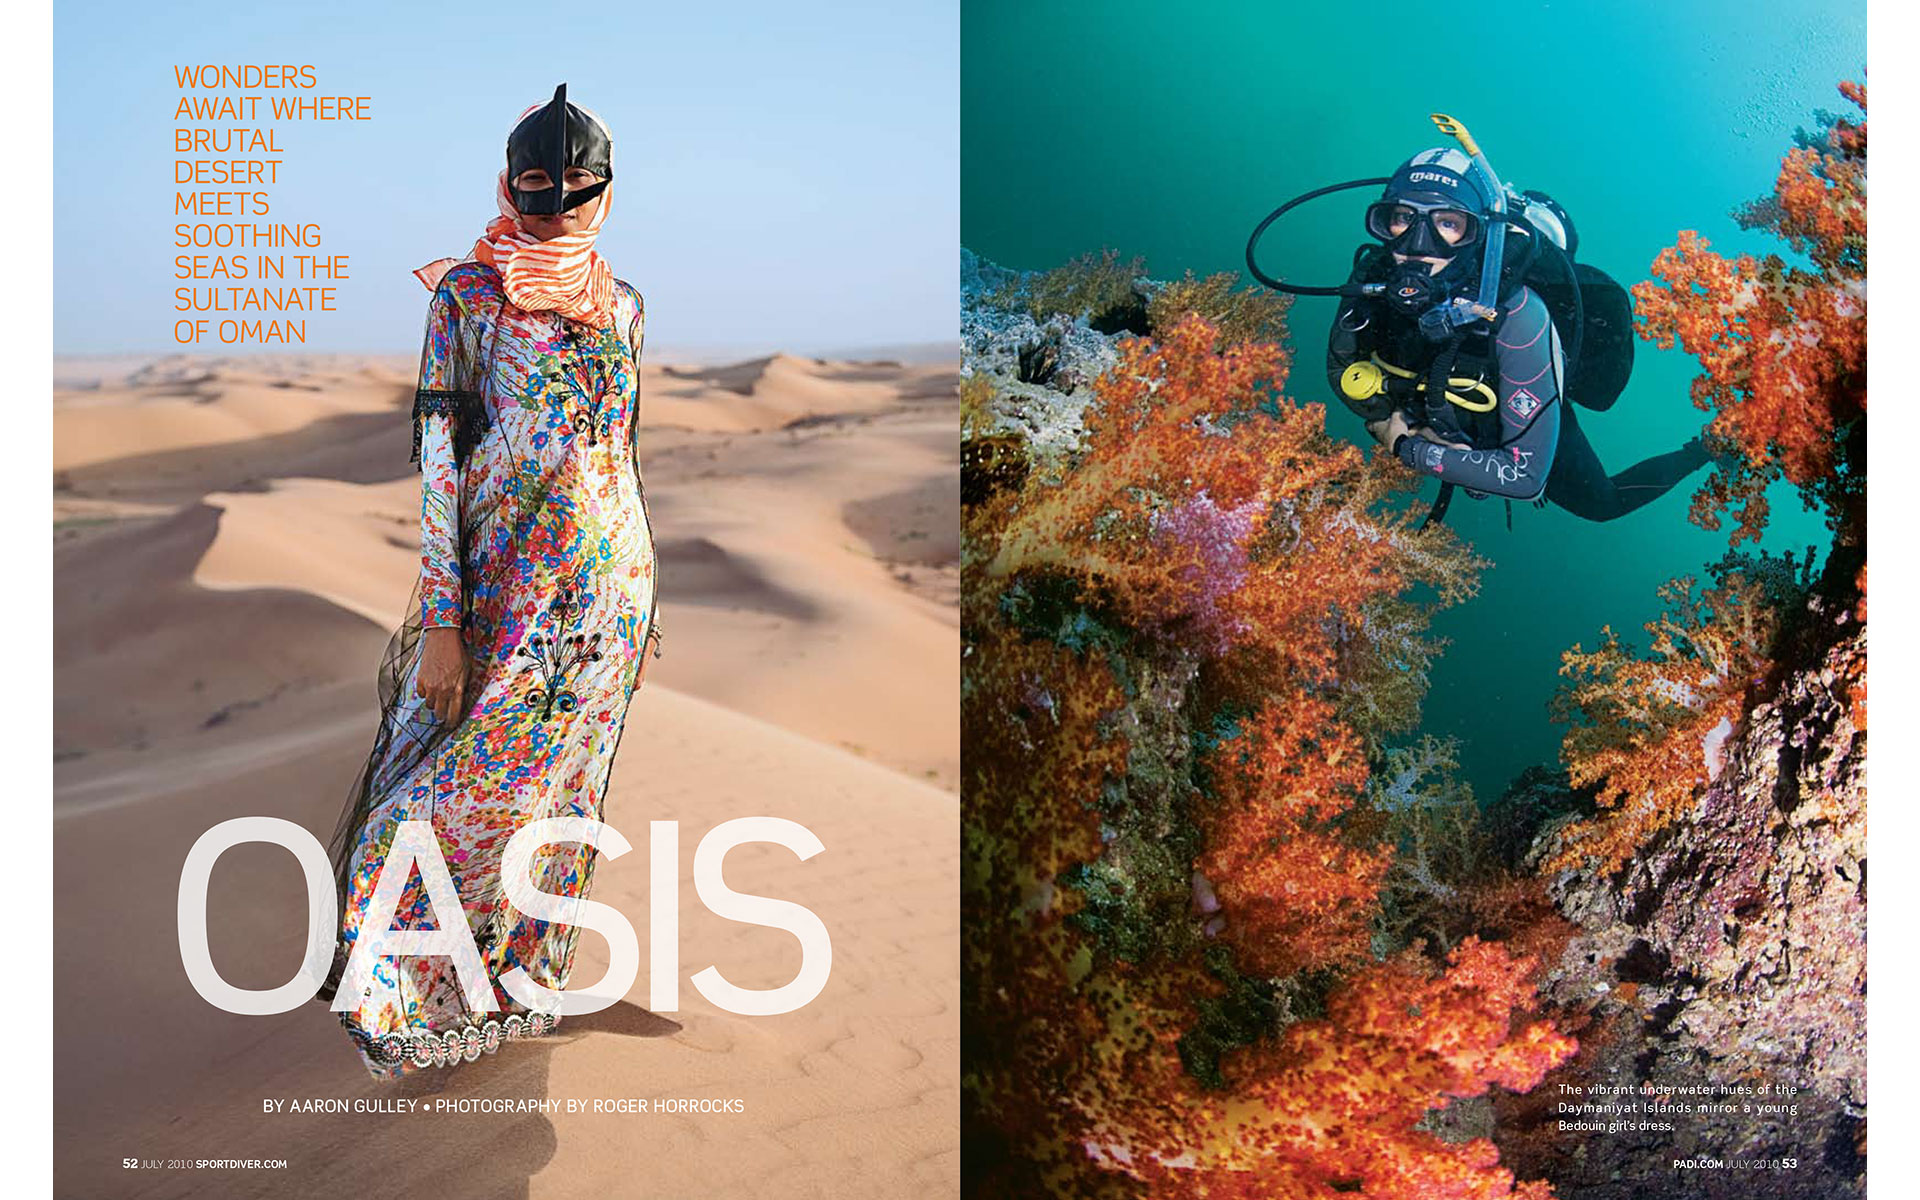 <p style="text-align: center;"><b><font color="2a2871">Oasis, Sport Diver, July 10</font></b>
</p>
Wonders await where brutal desert meets soothing seas in the Sultanate of Oman.
<p style="text-align: center;"><a href="/users/AaronGulley18670/SD_Oman_7-10.pdf" onclick="window.open(this.href, '', 'resizable=no,status=no,location=no,toolbar=no,menubar=no,fullscreen=no,scrollbars=no,dependent=no,width=900'); return false;">Read the Story</a></p>
